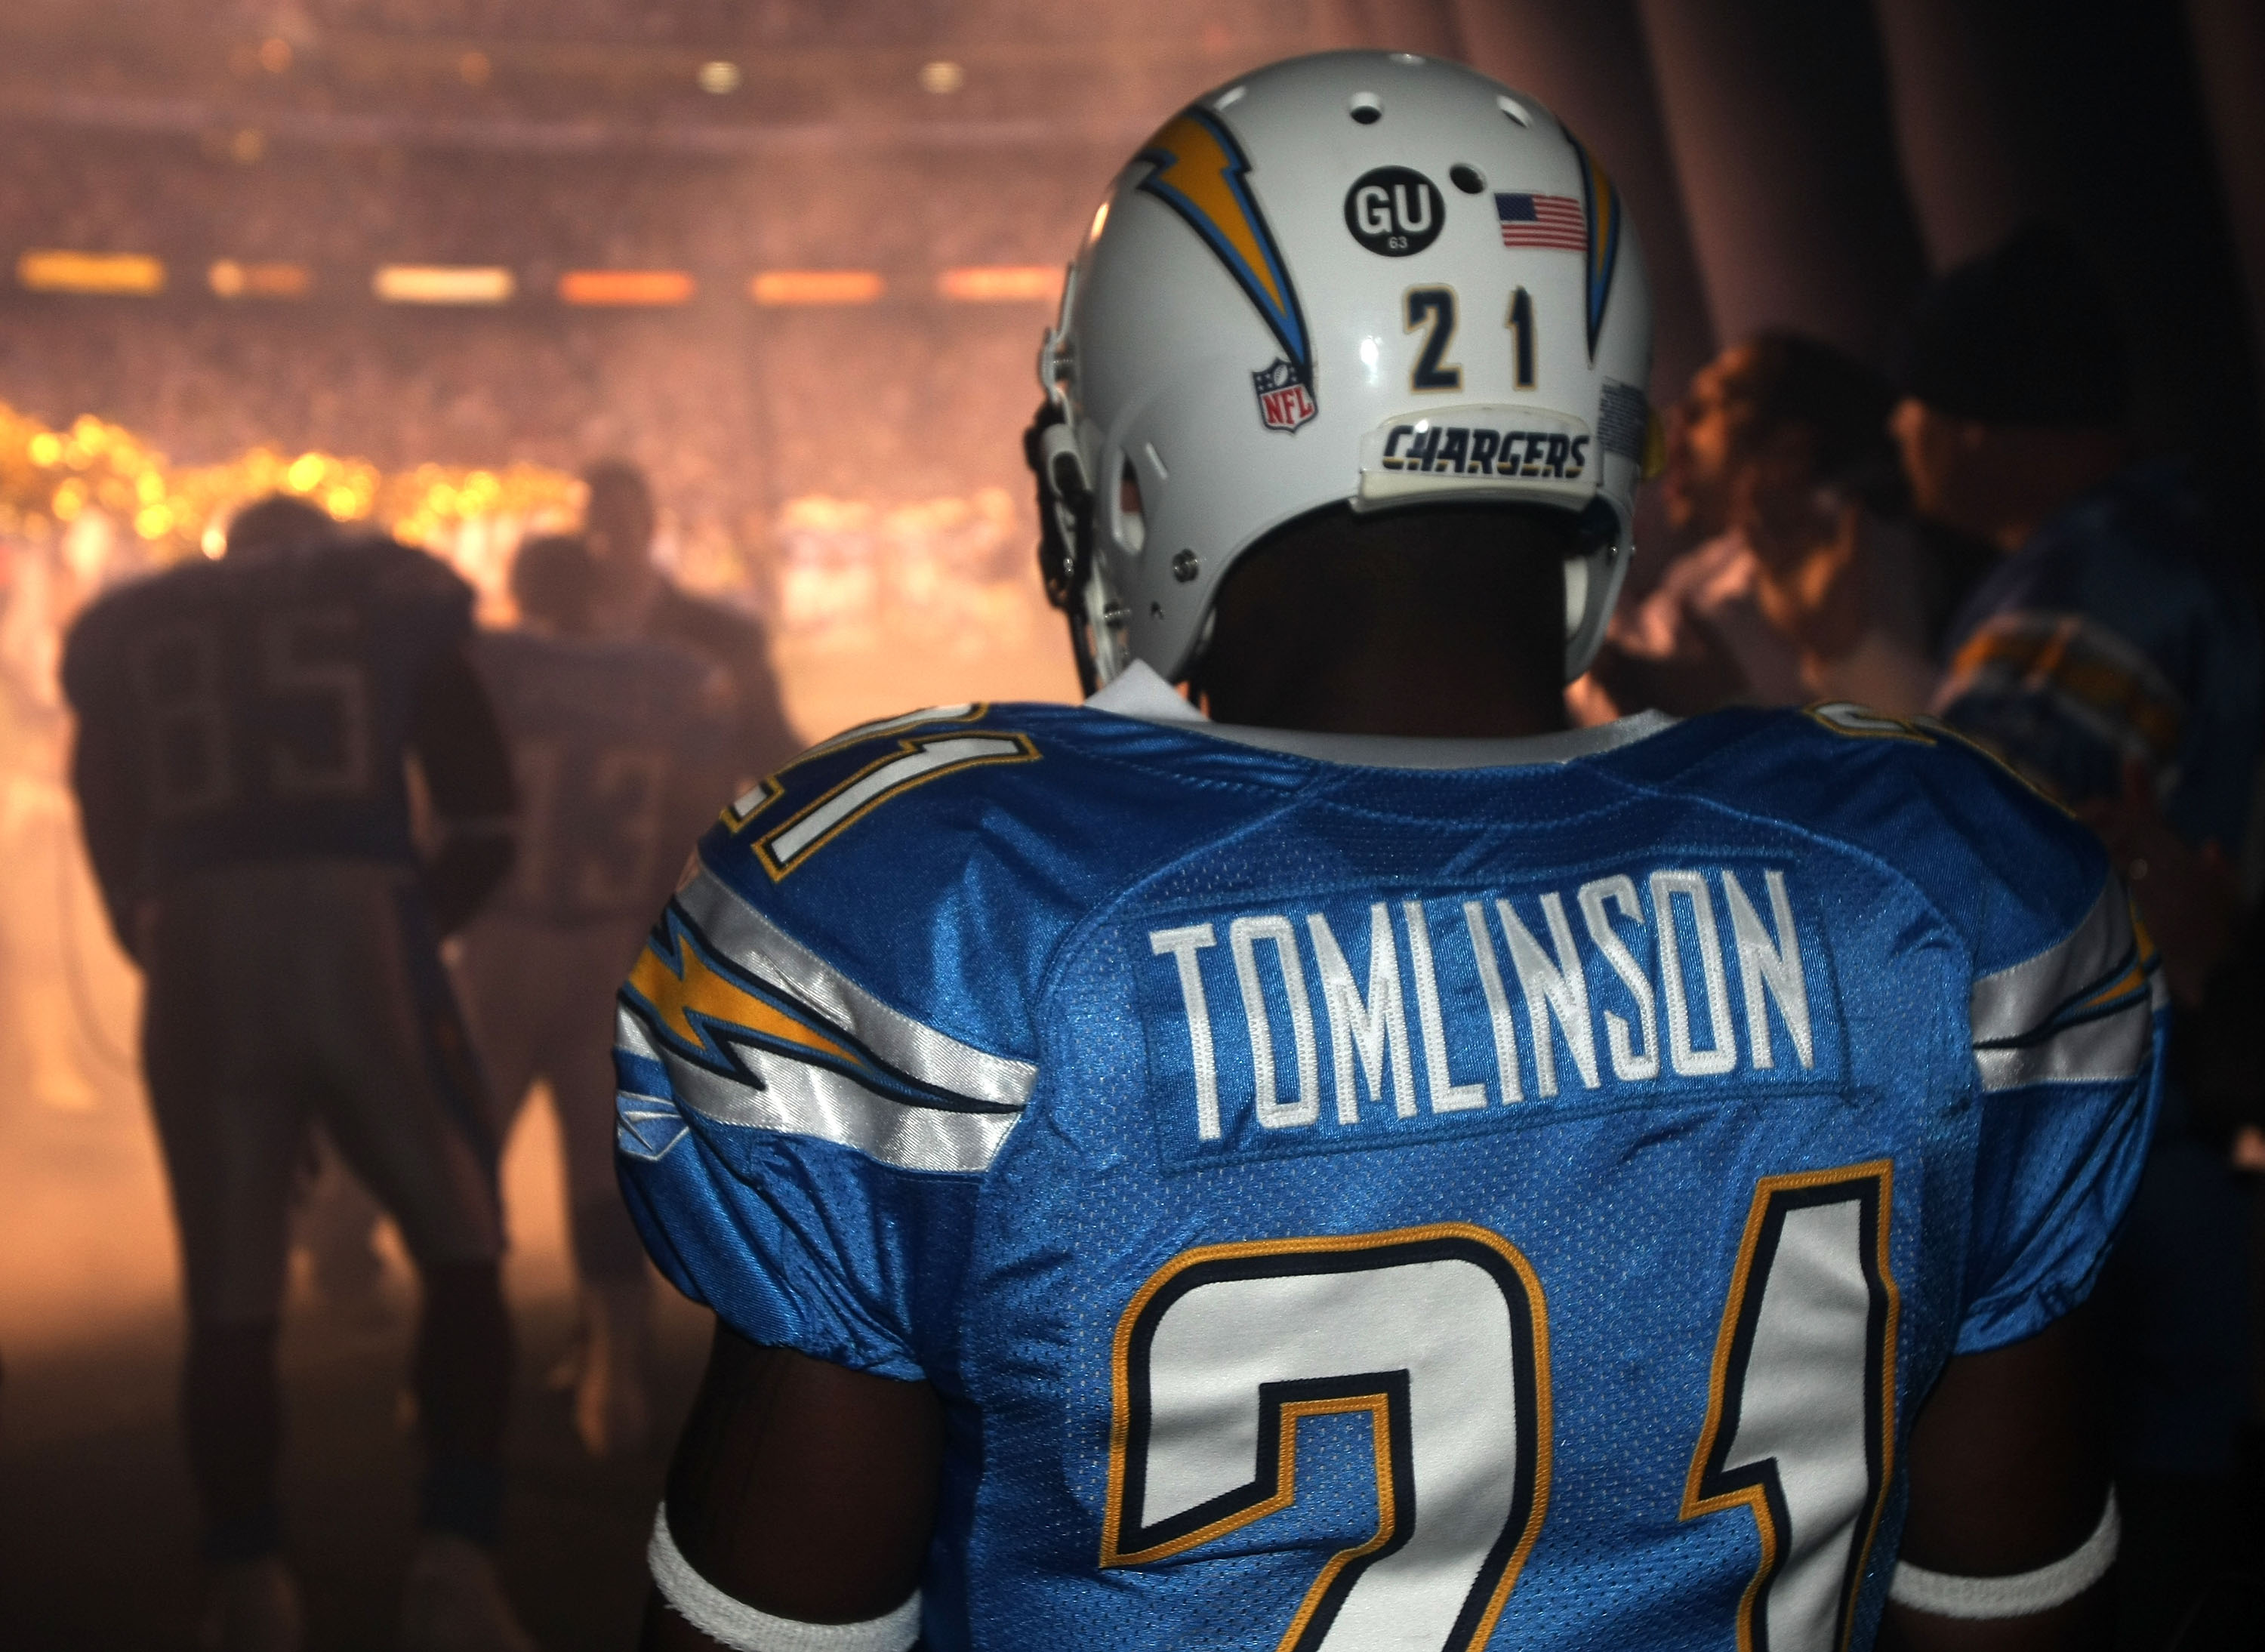 chargers 21 jersey